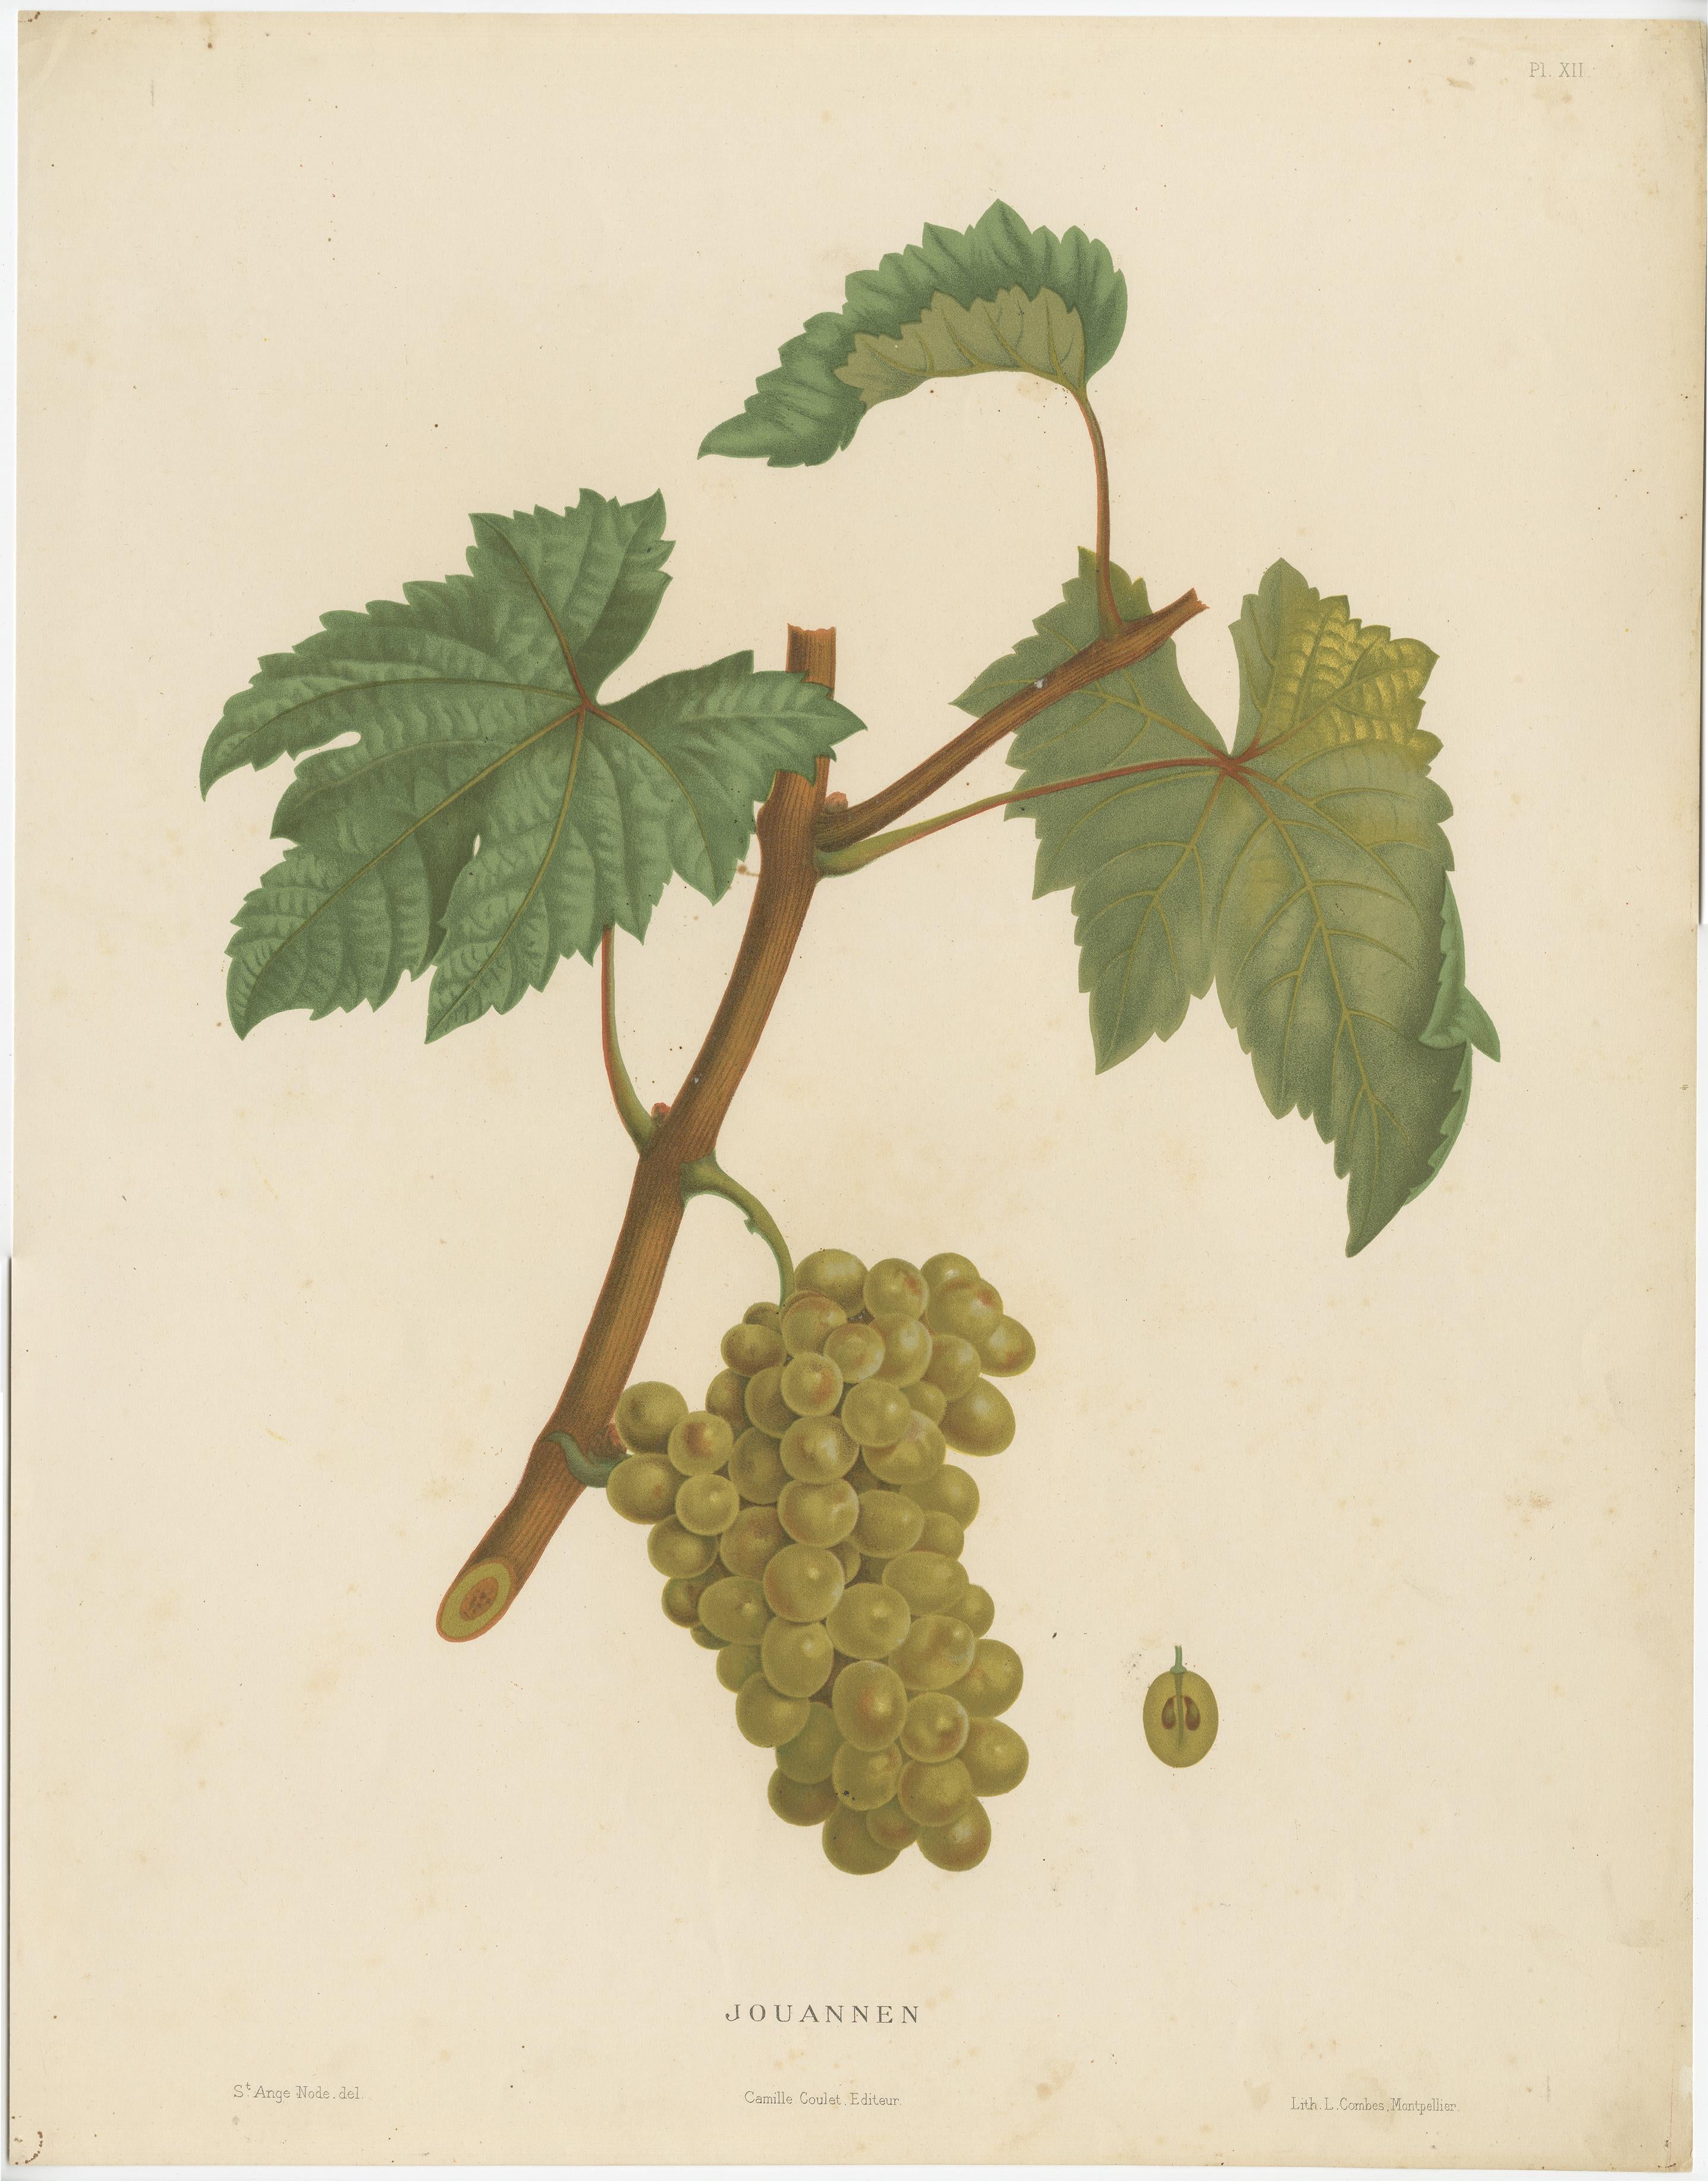 Beautiful and decorative large lithograph of the Jouannen variety of grapes. 

A nice print to have on the wall for every wine lover. Original hand-coloured in the 19th century.

From the work: 'Description of the main grape varieties of the